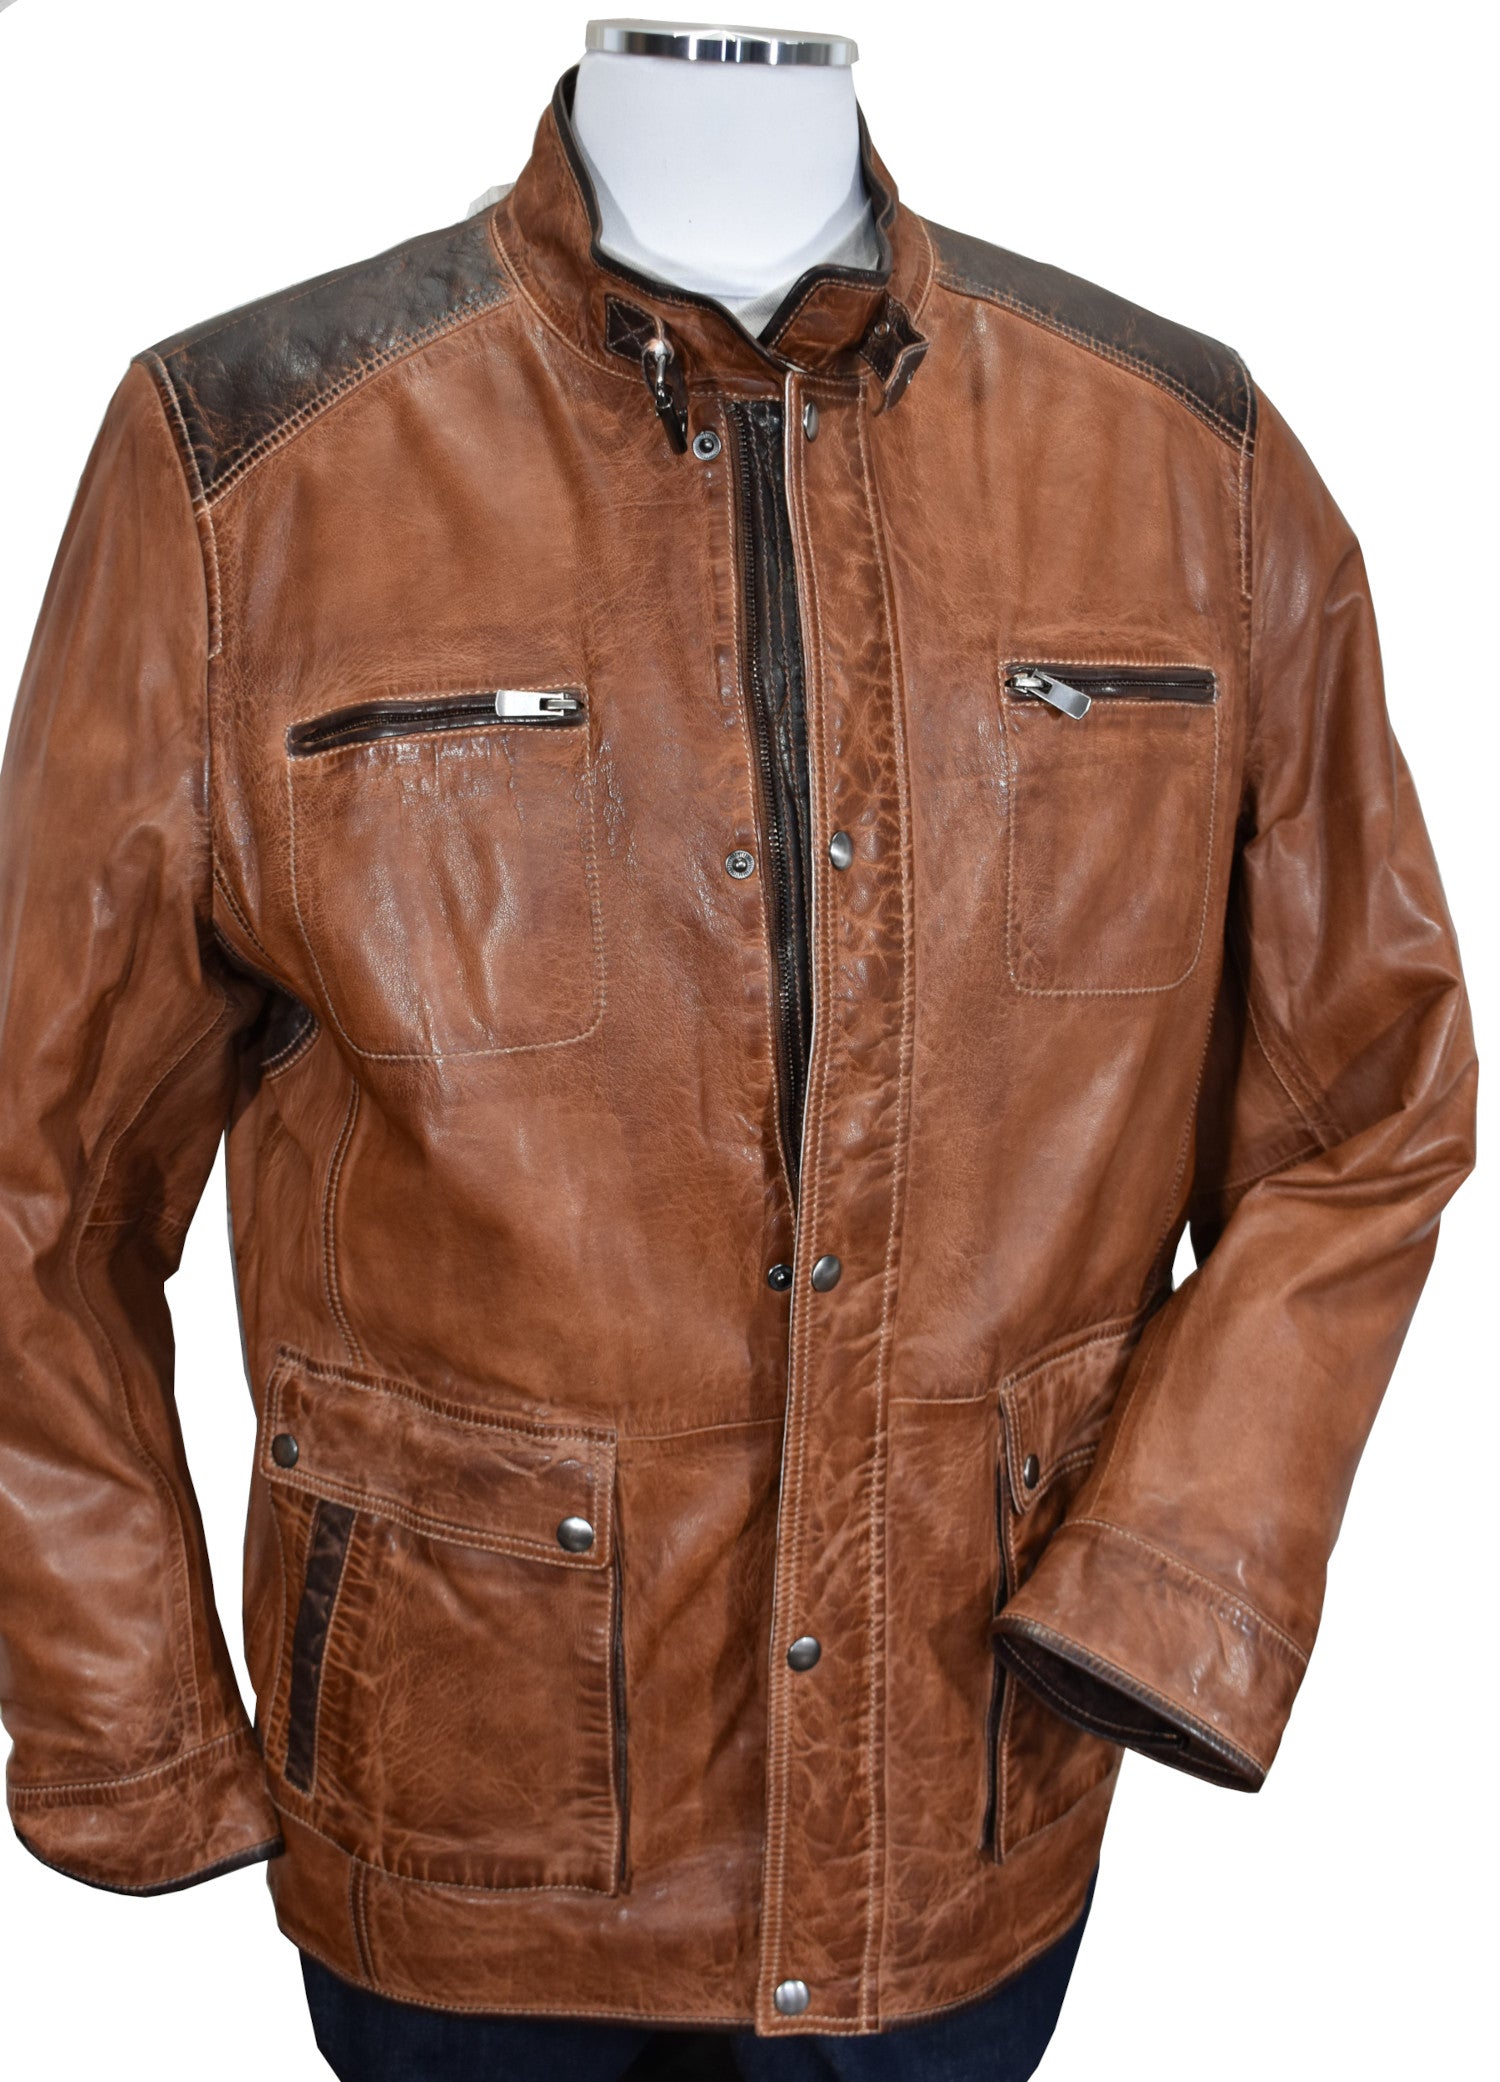 Marcello Sport soft washed and slightly distressed nappa leather coat in a rich cognac color with chocolate leather accents.  The cool model features enhanced and multiple stitch detailing and both zipper and button front enclosure. Side waist flap pockets and classic inside chest pockets.  Biker model is a straight cut with a length just below the hips.  Classic fit.